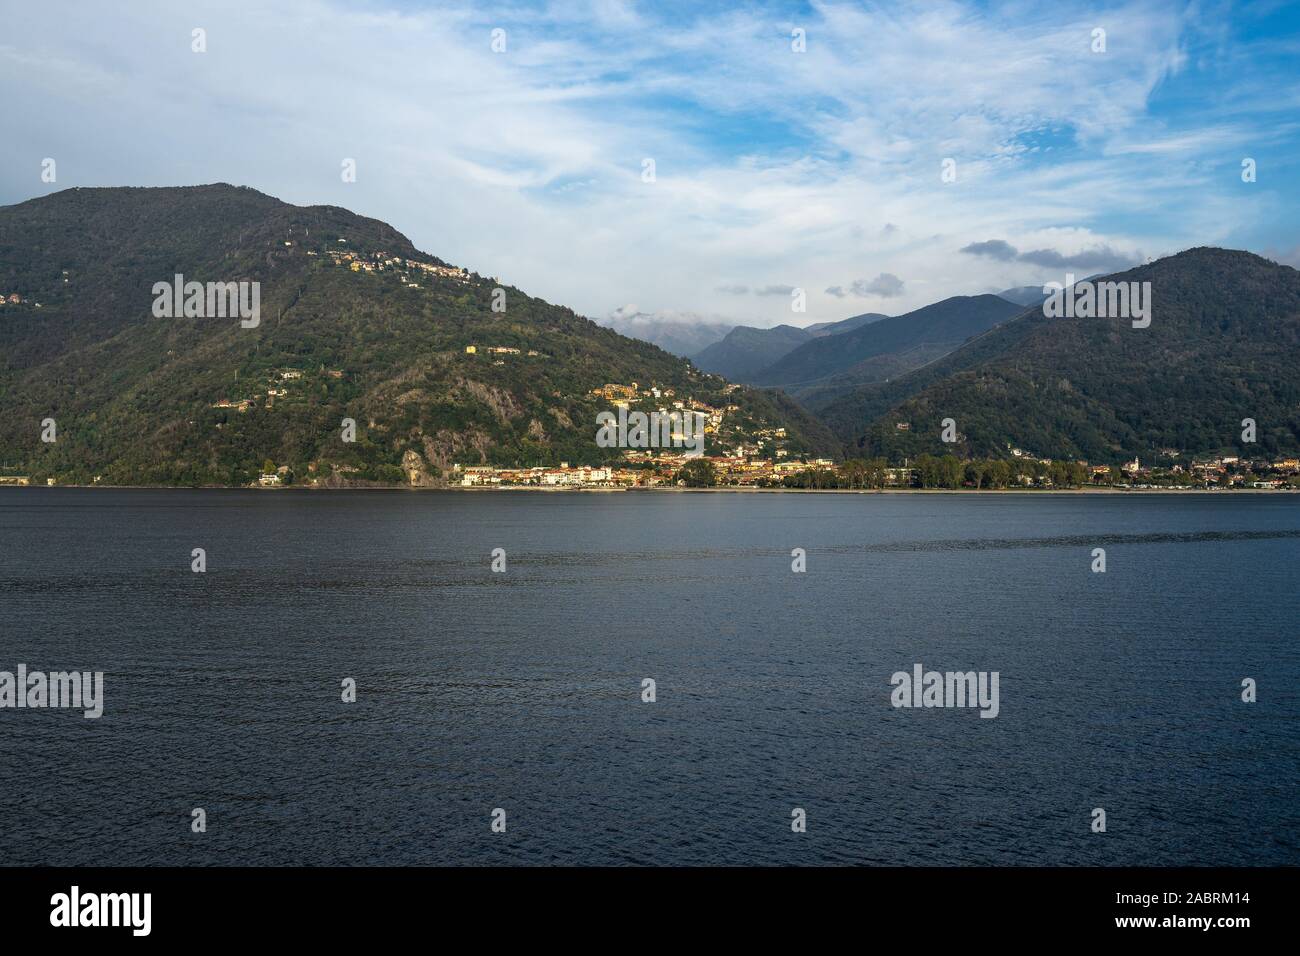 Landscape of Lago Maggiore at sunset from a ferry boat cruising on the lake, Italy Stock Photo